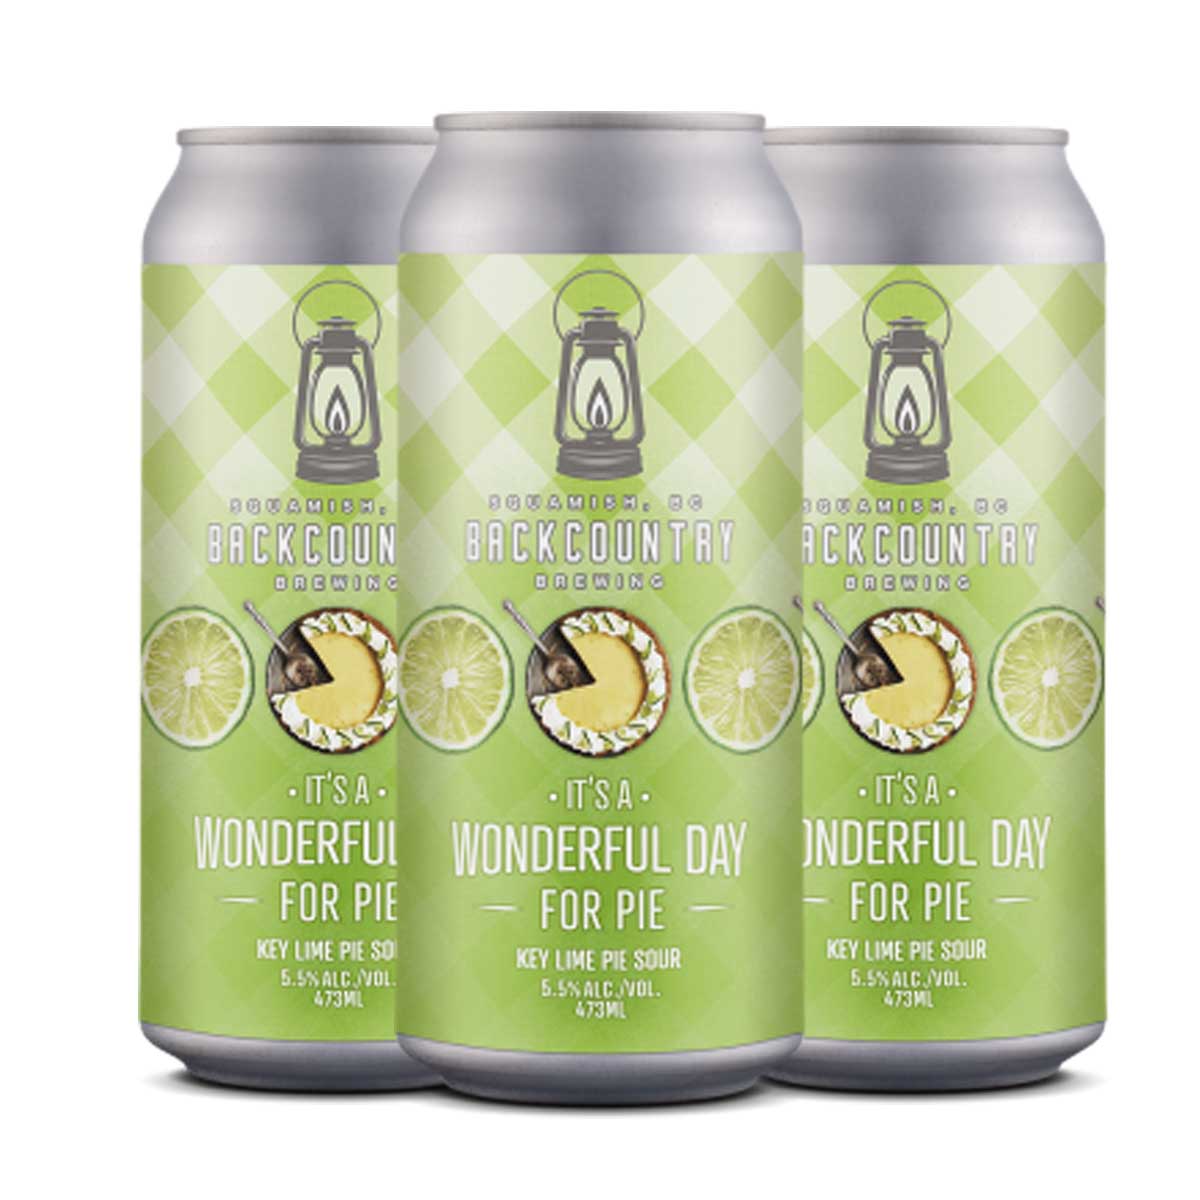 TAG Liquor Stores BC - Backcountry Brewing "It's a wonderful day for pie" Key Lime Pie Sour 4 Pack Cans